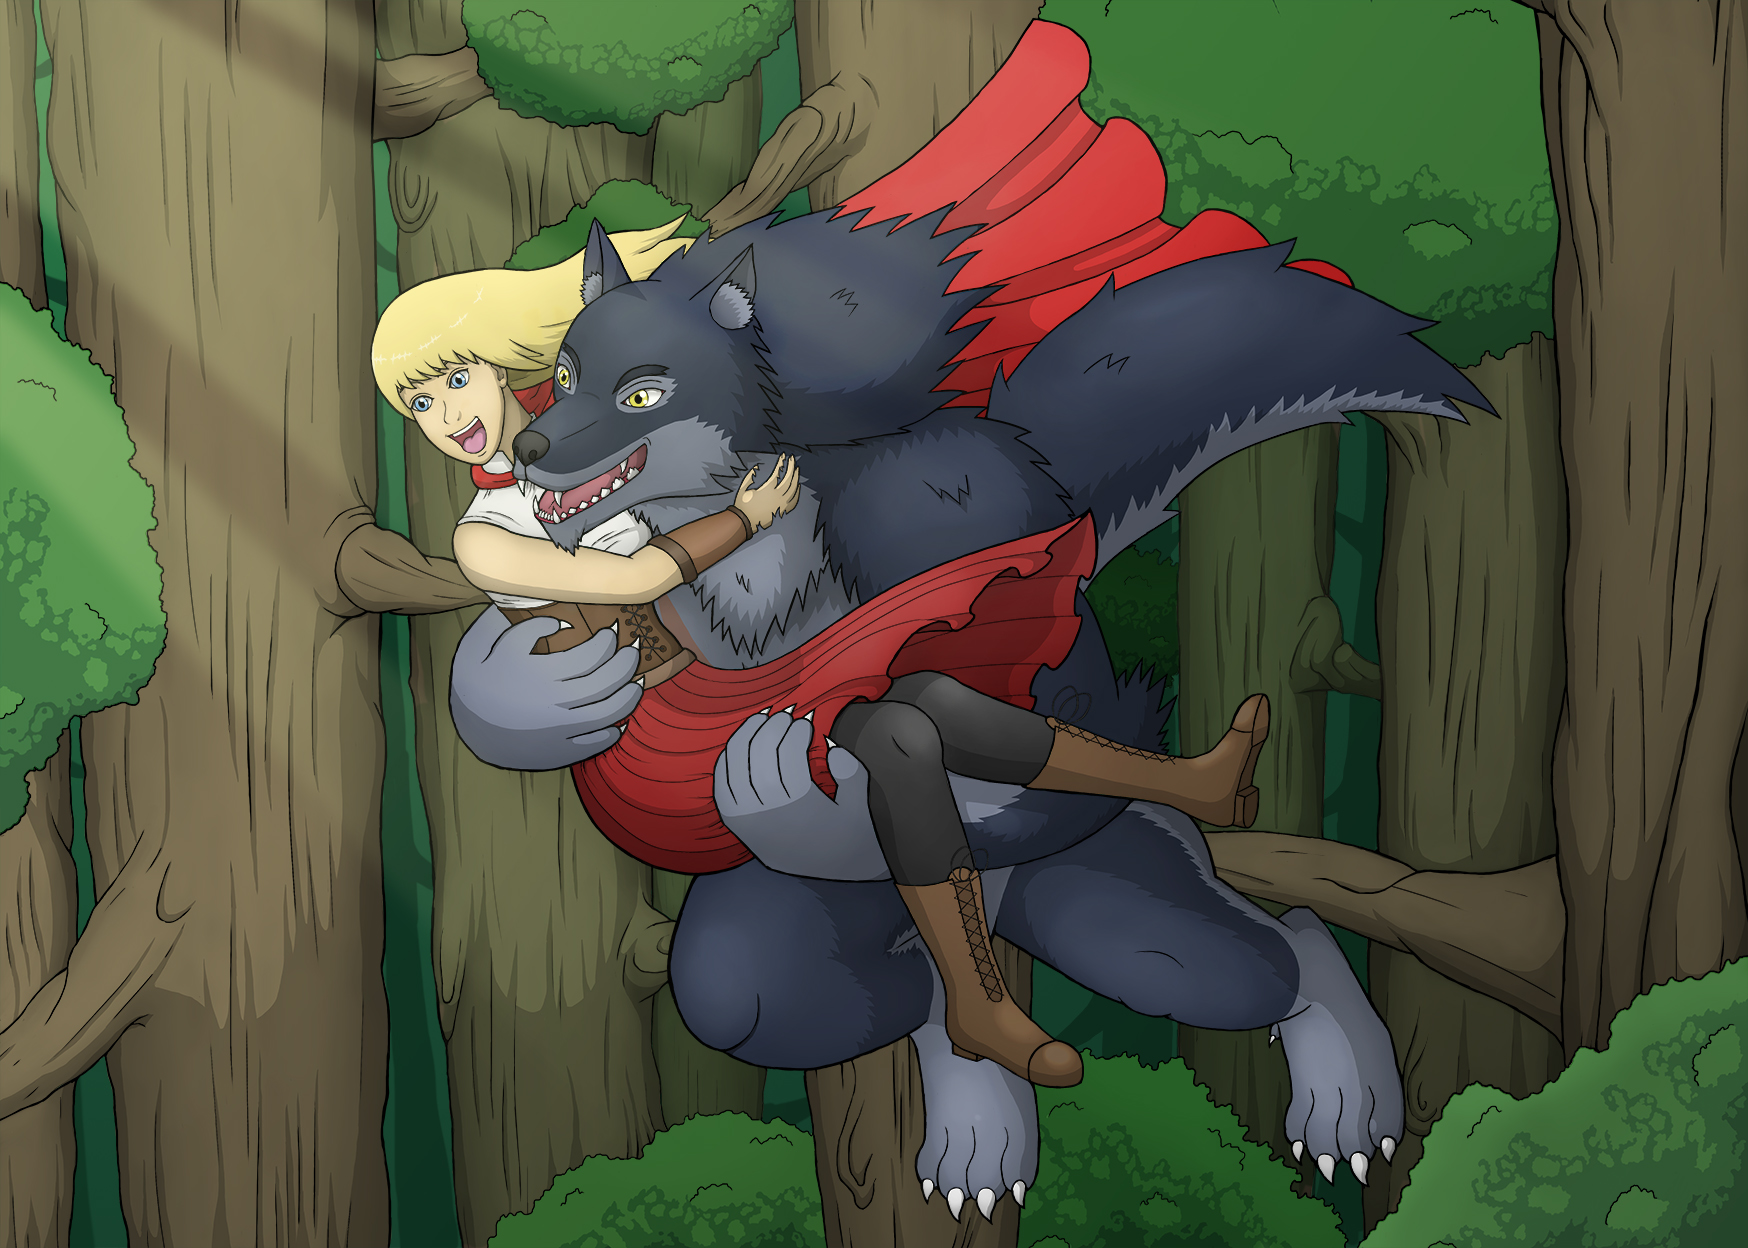 jumping_in_the_arms_of_the_big_bad_wolf_by_grimgor09-d7uqe51.jpg